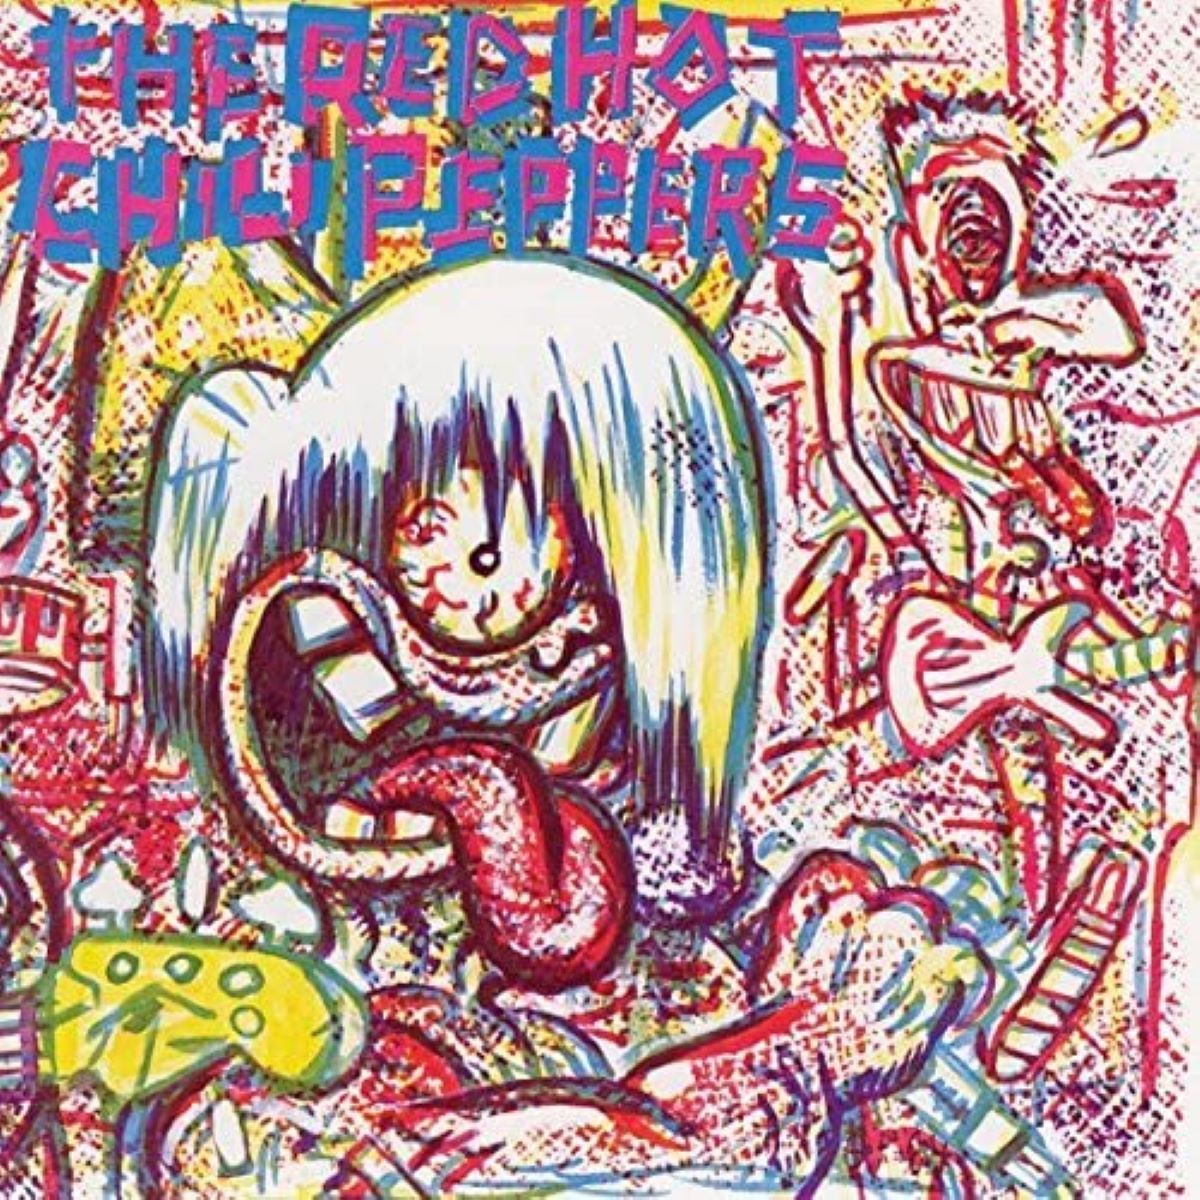 01. Red Hot Chili Peppers (1984)